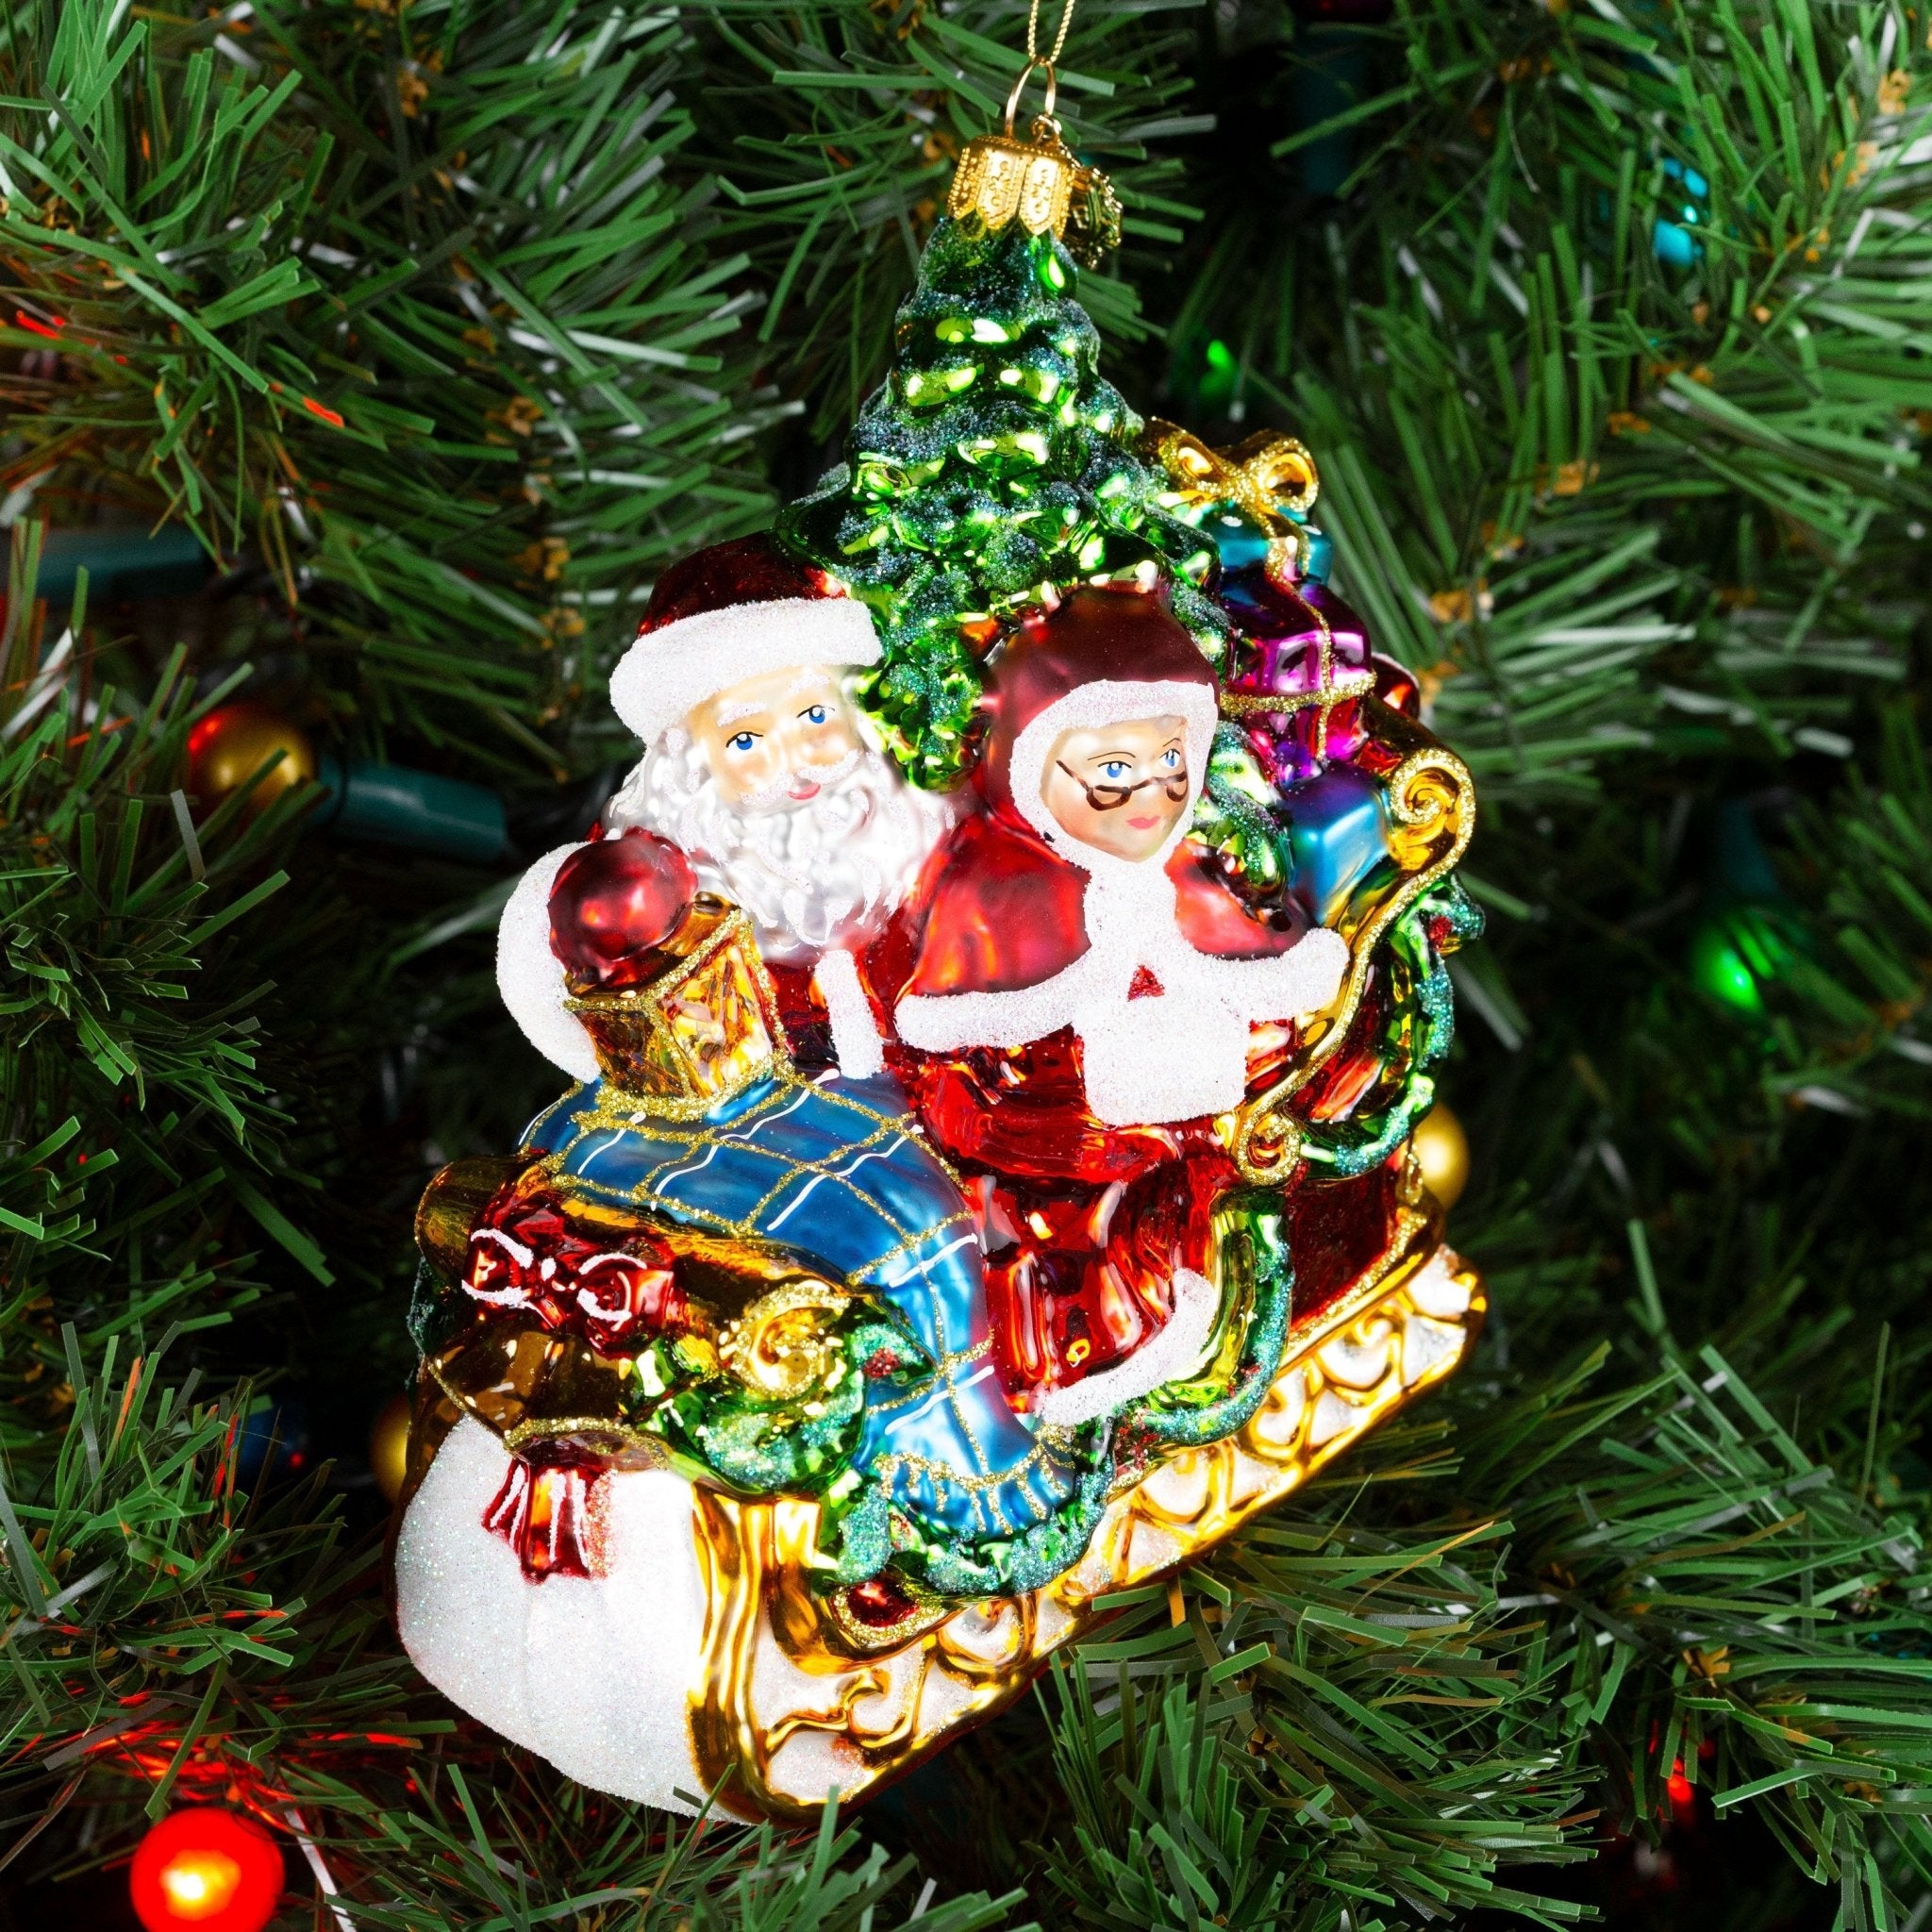 Pier-1-Santa-and-Mrs-Claus-on-a-Sleigh-Ride-Glass-Christmas-Ornament-Dinnerware